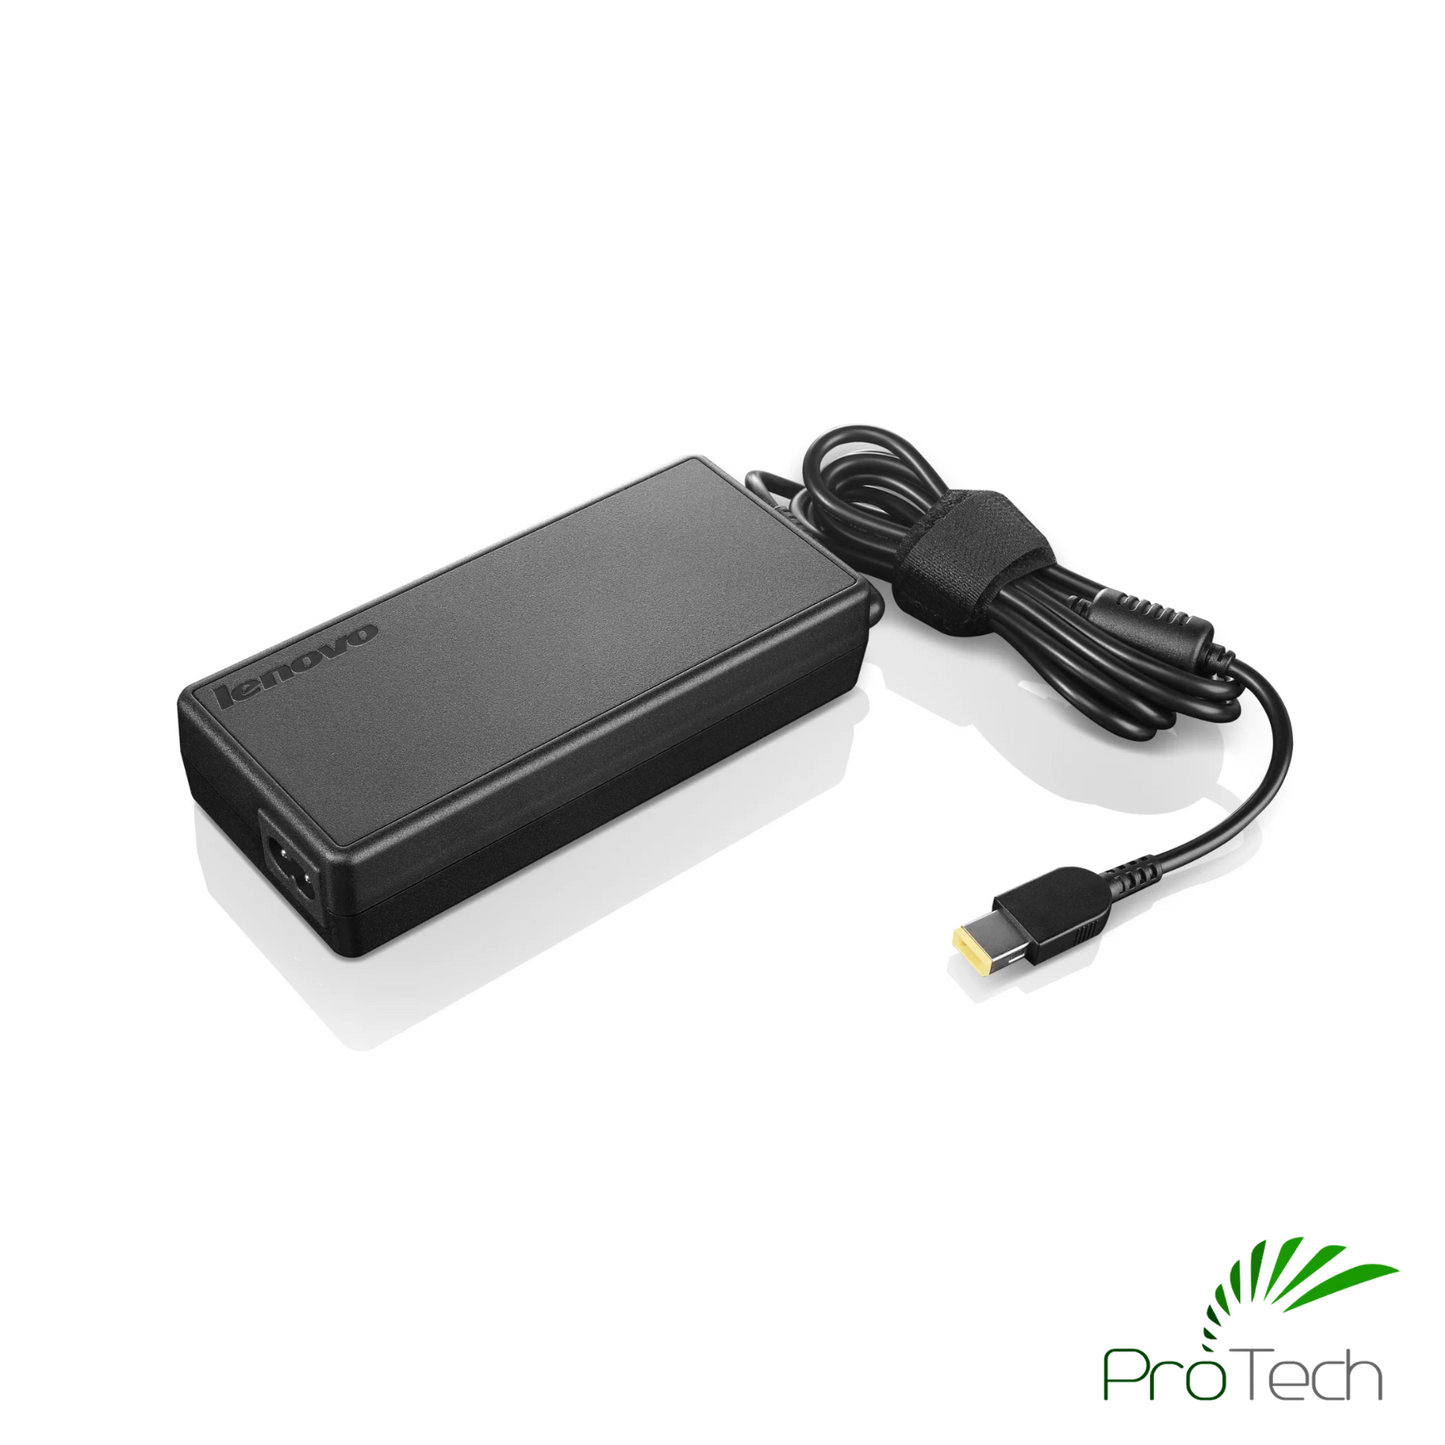 Lenovo Chargers | Assorted ProTech I.T. Solutions